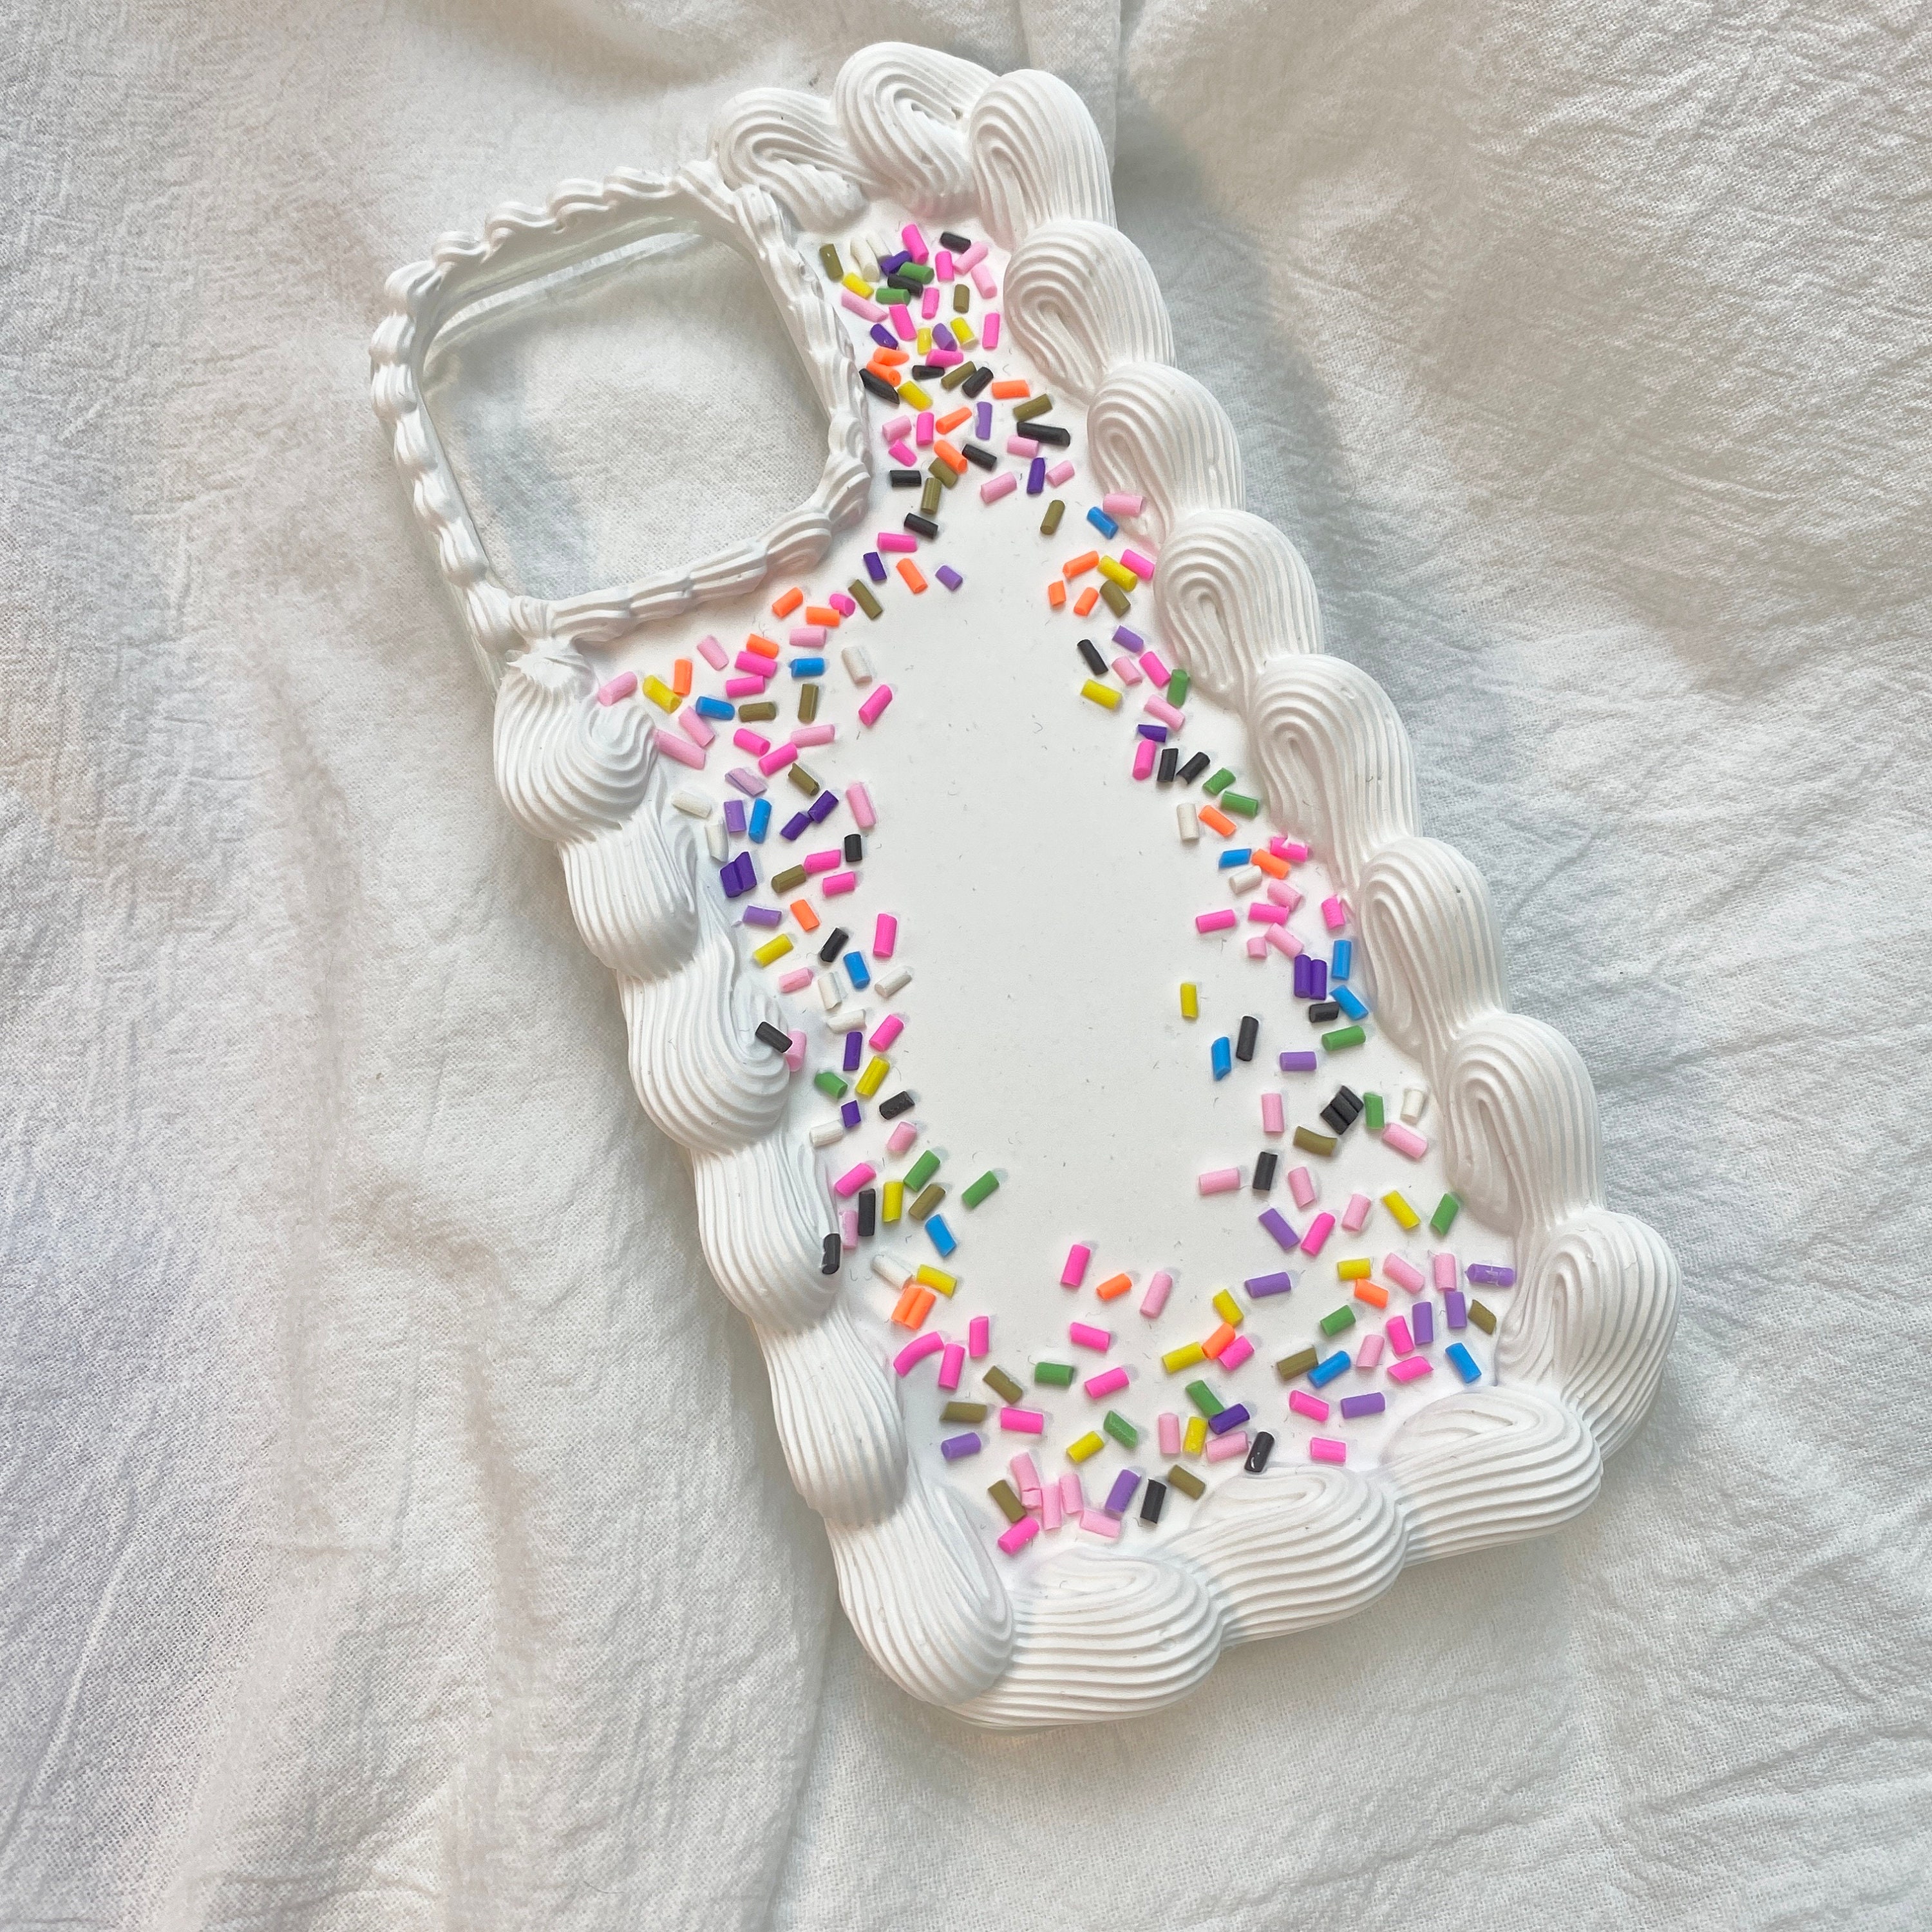 Fake Whipped Cream / Sillicone Frosting Clay / Faux Icing (White / 50ml + 2  Piping Tips) Phone Case Deco Dollhouse Sweets Decoden CLAY10